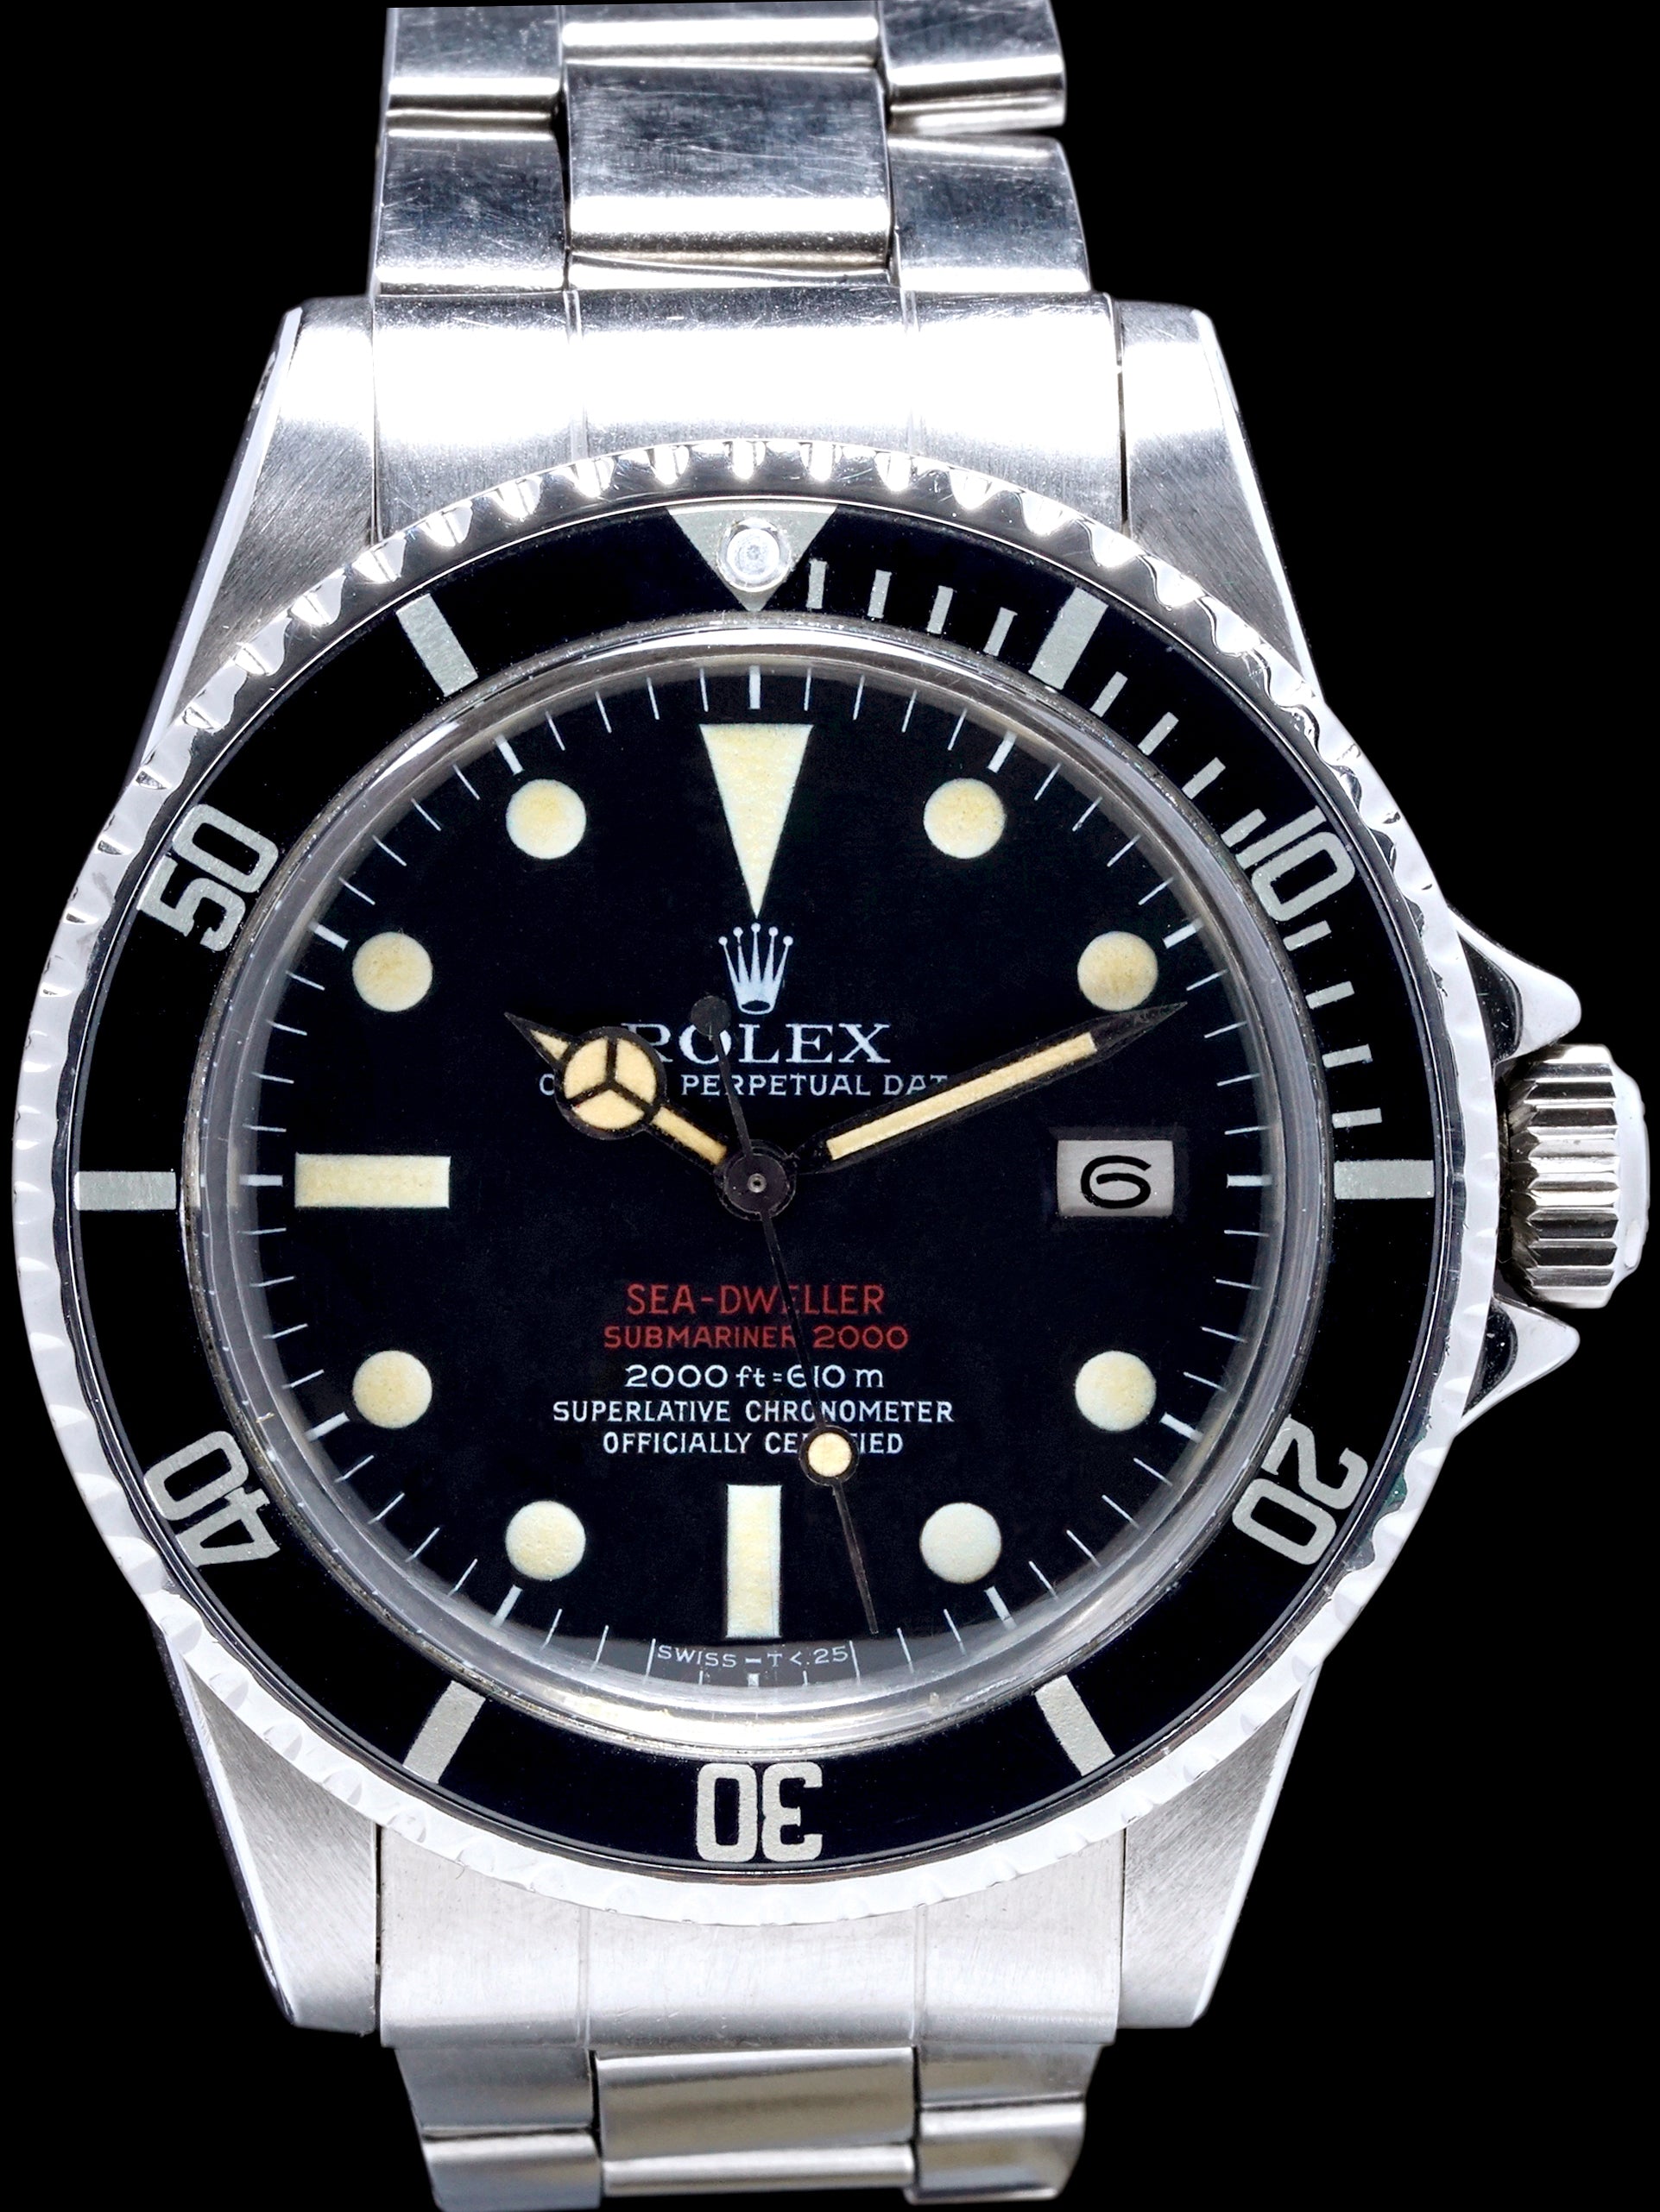 1972 Rolex Double Red Sea-Dweller (Ref. 1665) "Mk. III" W/ Box & Papers